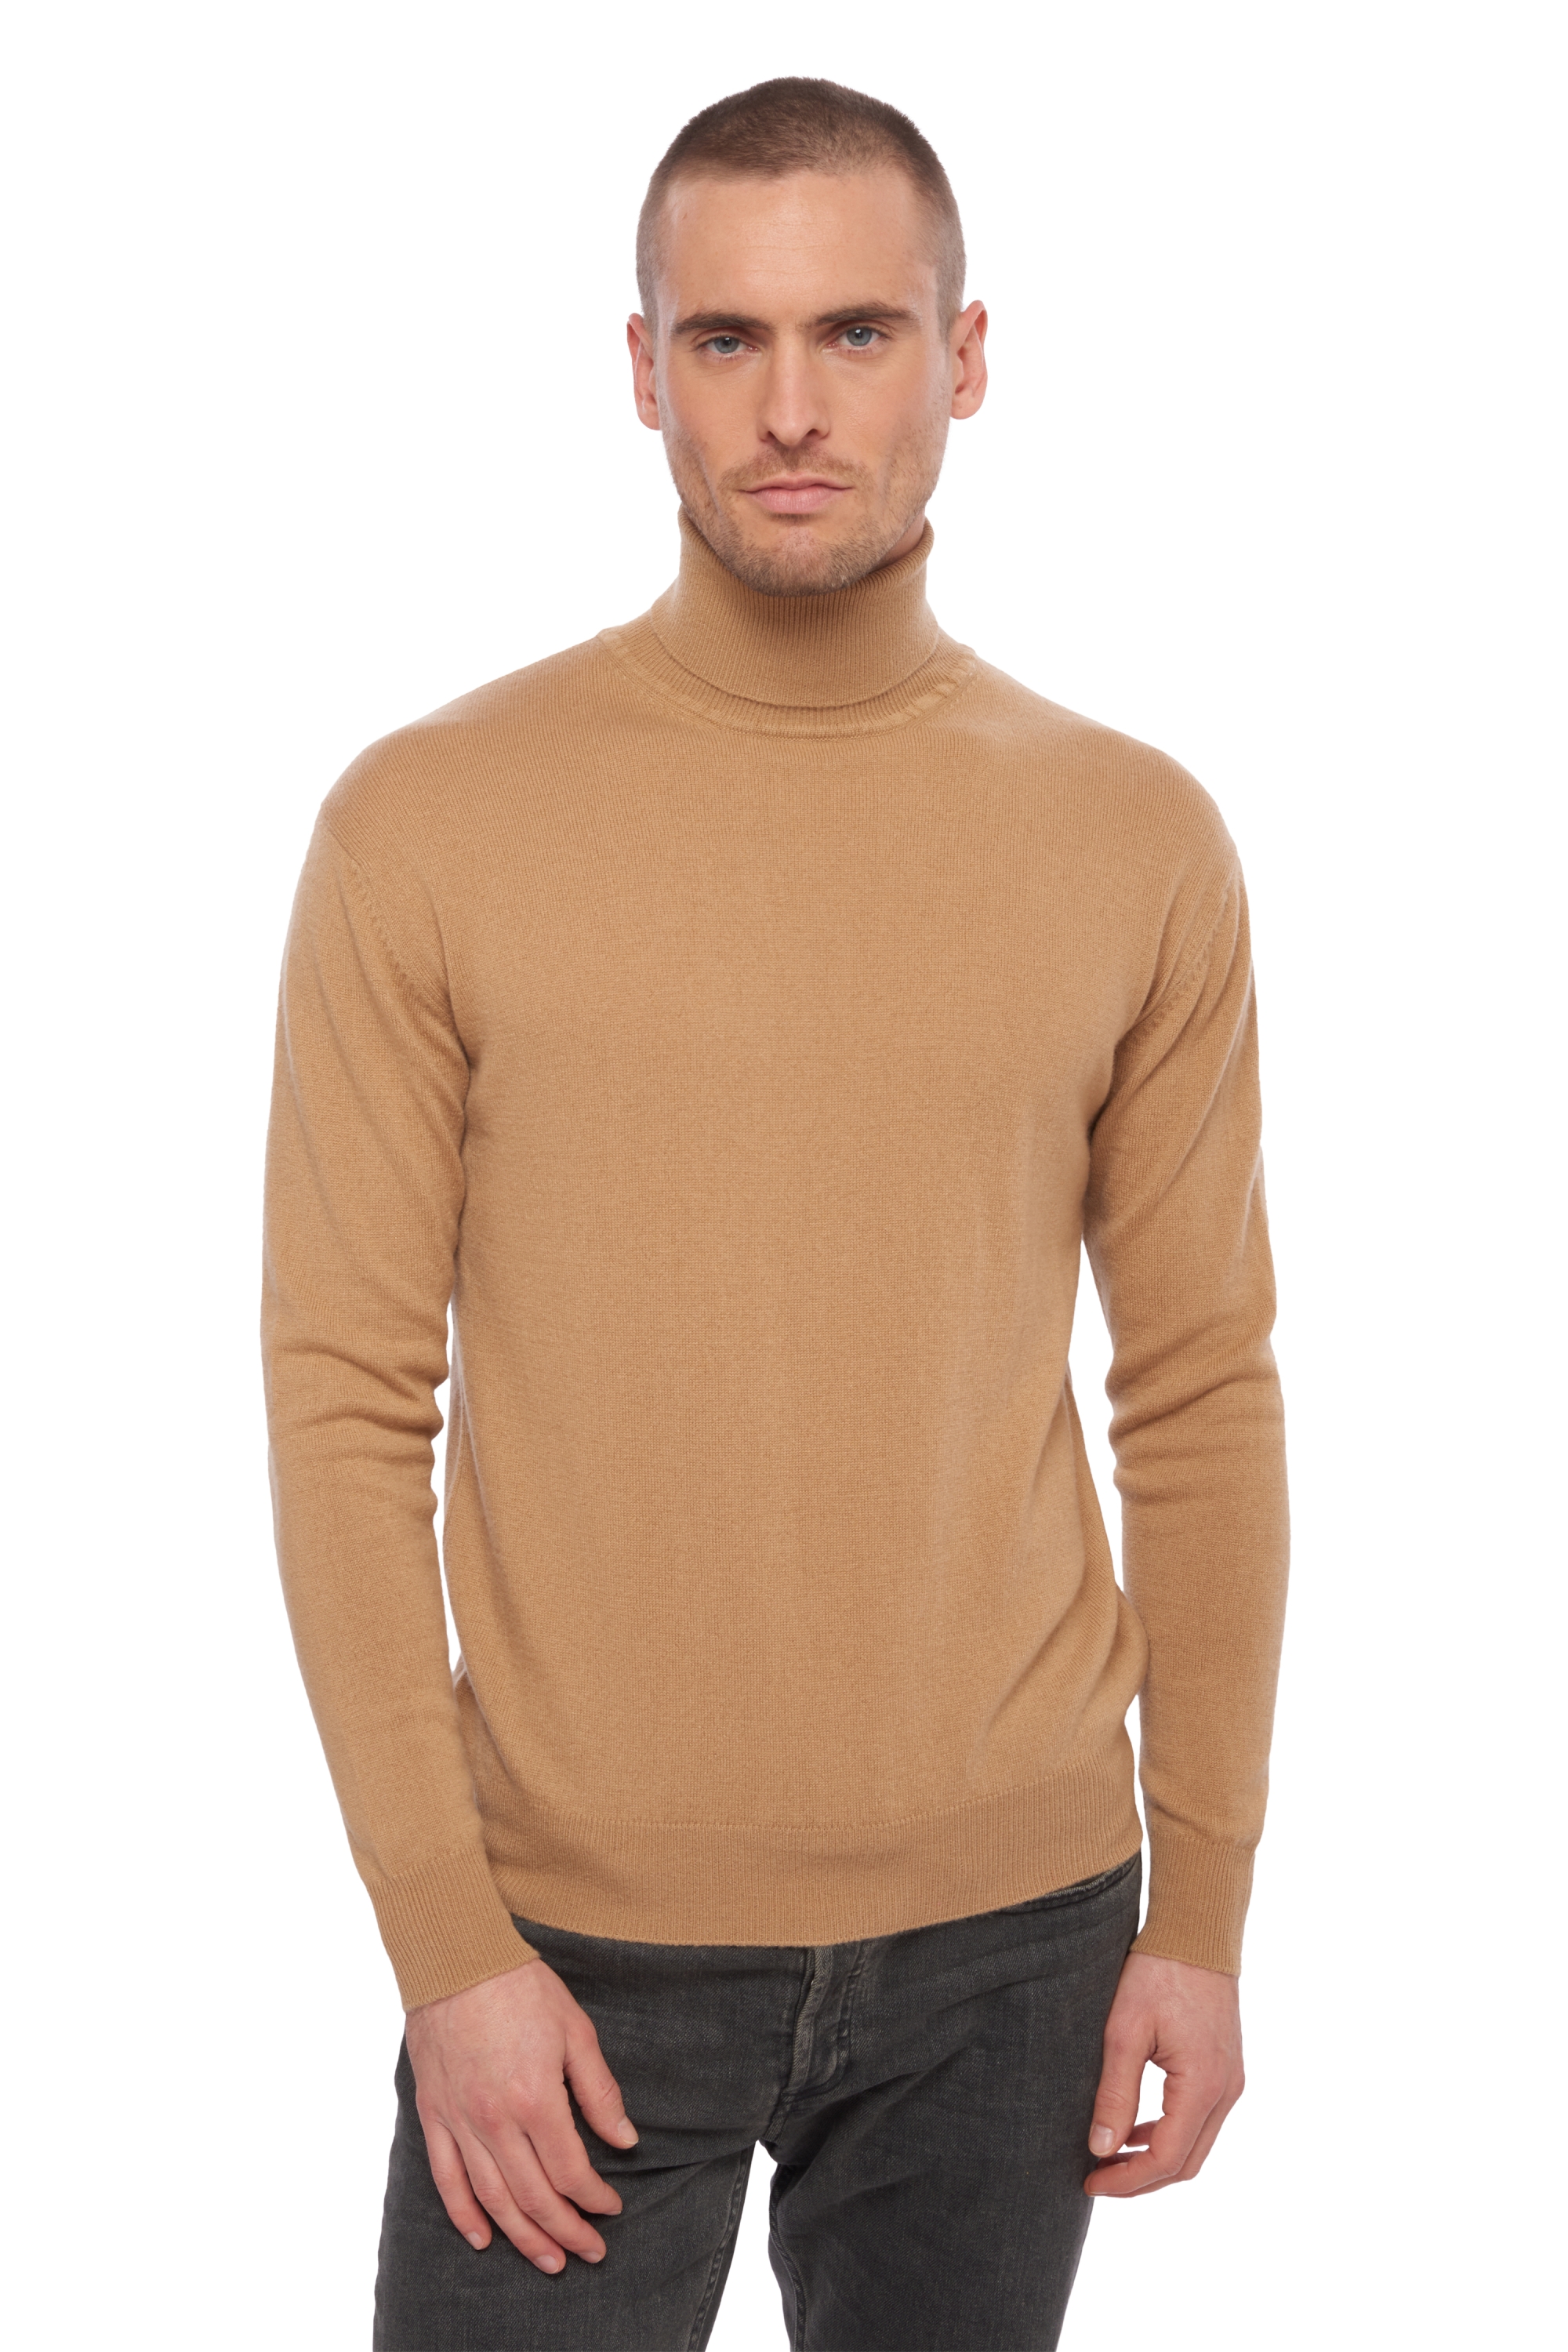 Cachemire pull homme col roule edgar camel xl